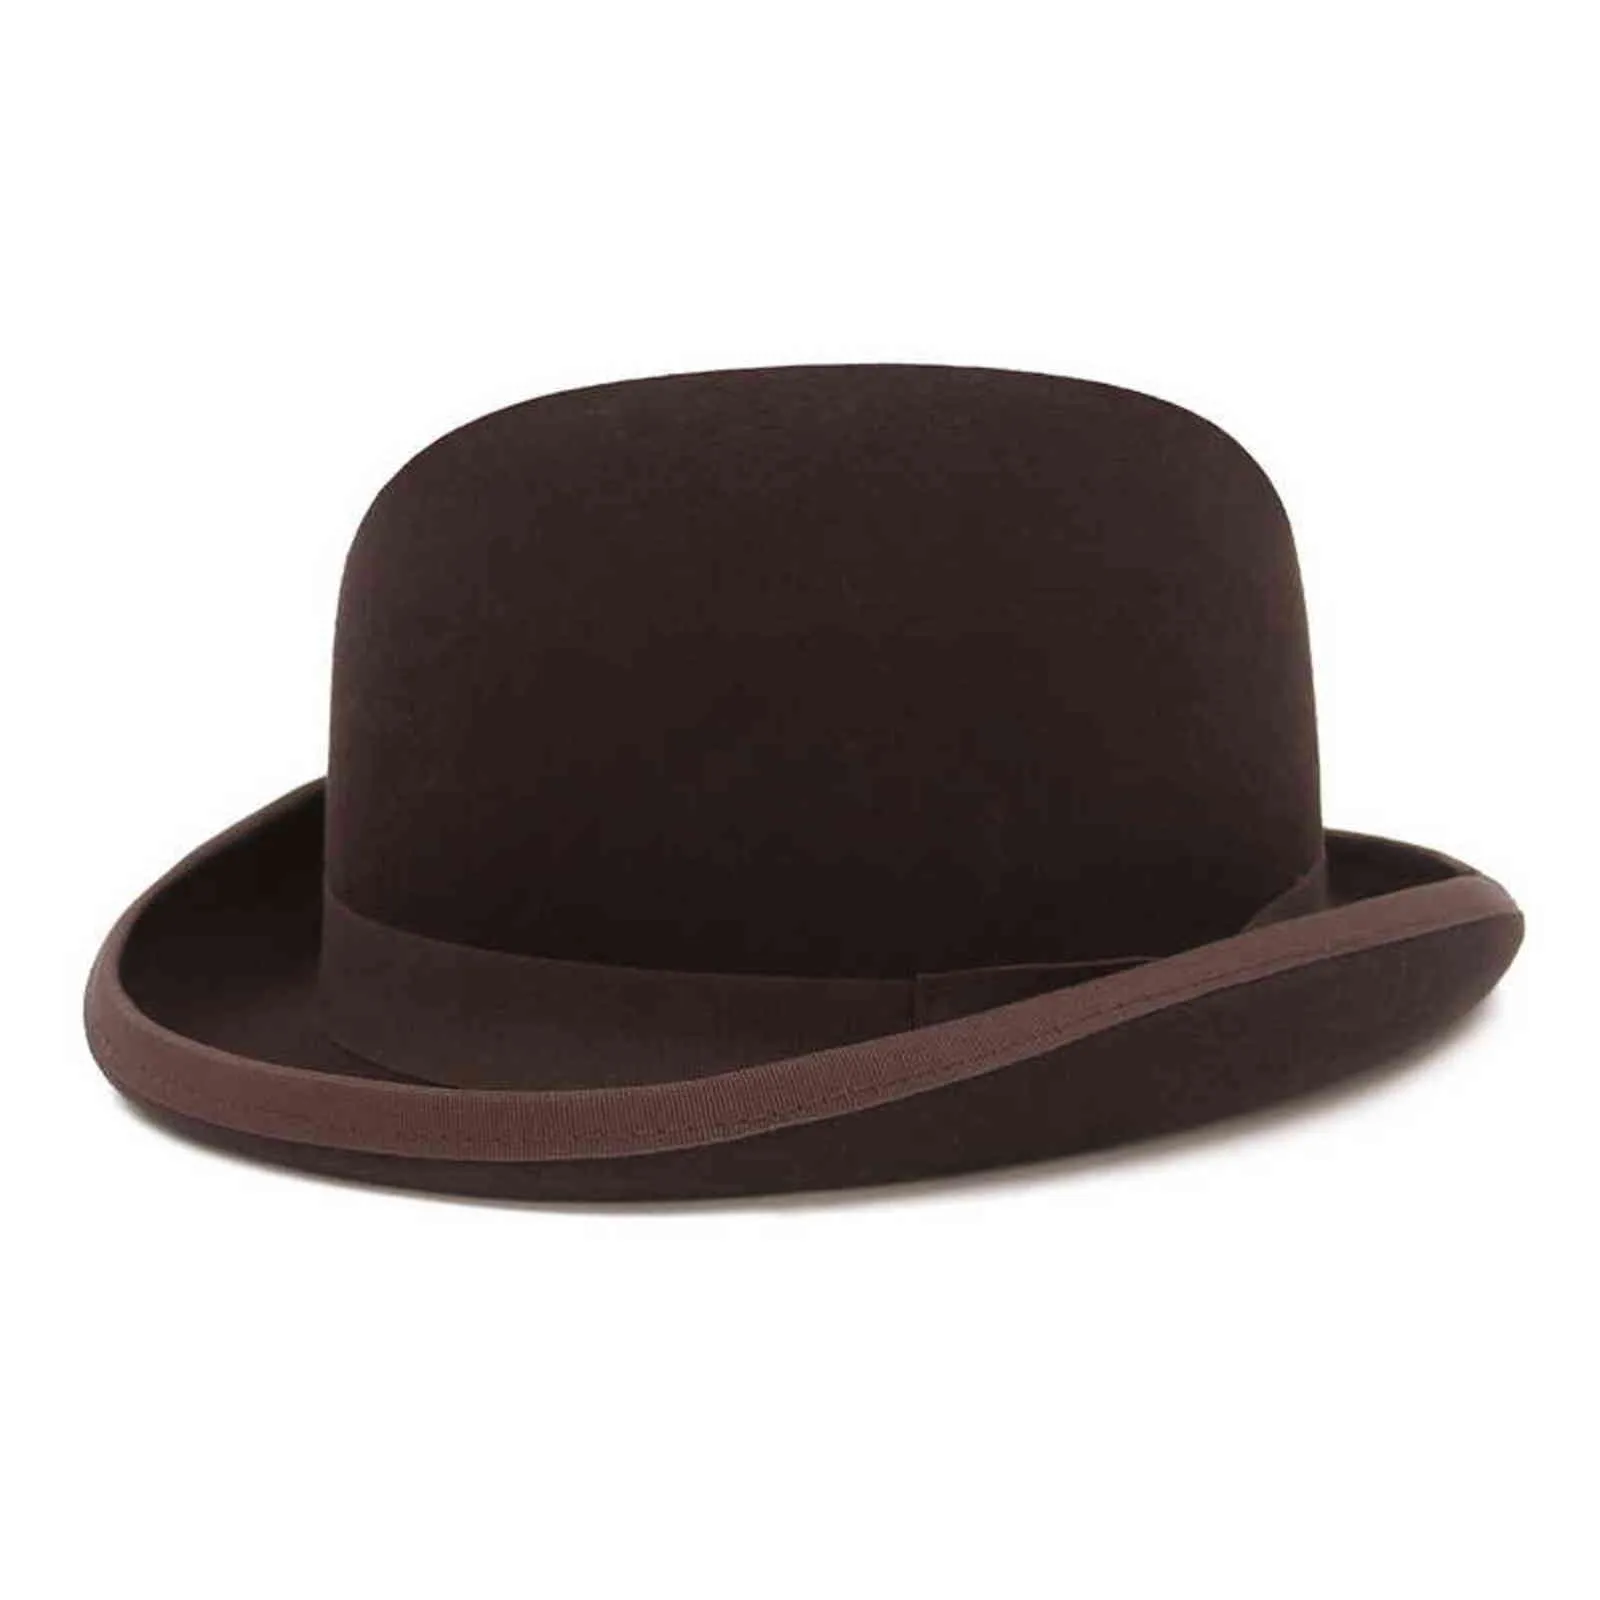 Gemvie 4 Colours 100 Wool Feel Derby Bowler Hat for Men Satin Lined Fashion Party Formin Fedora Costume Magician Hat Y11181284298